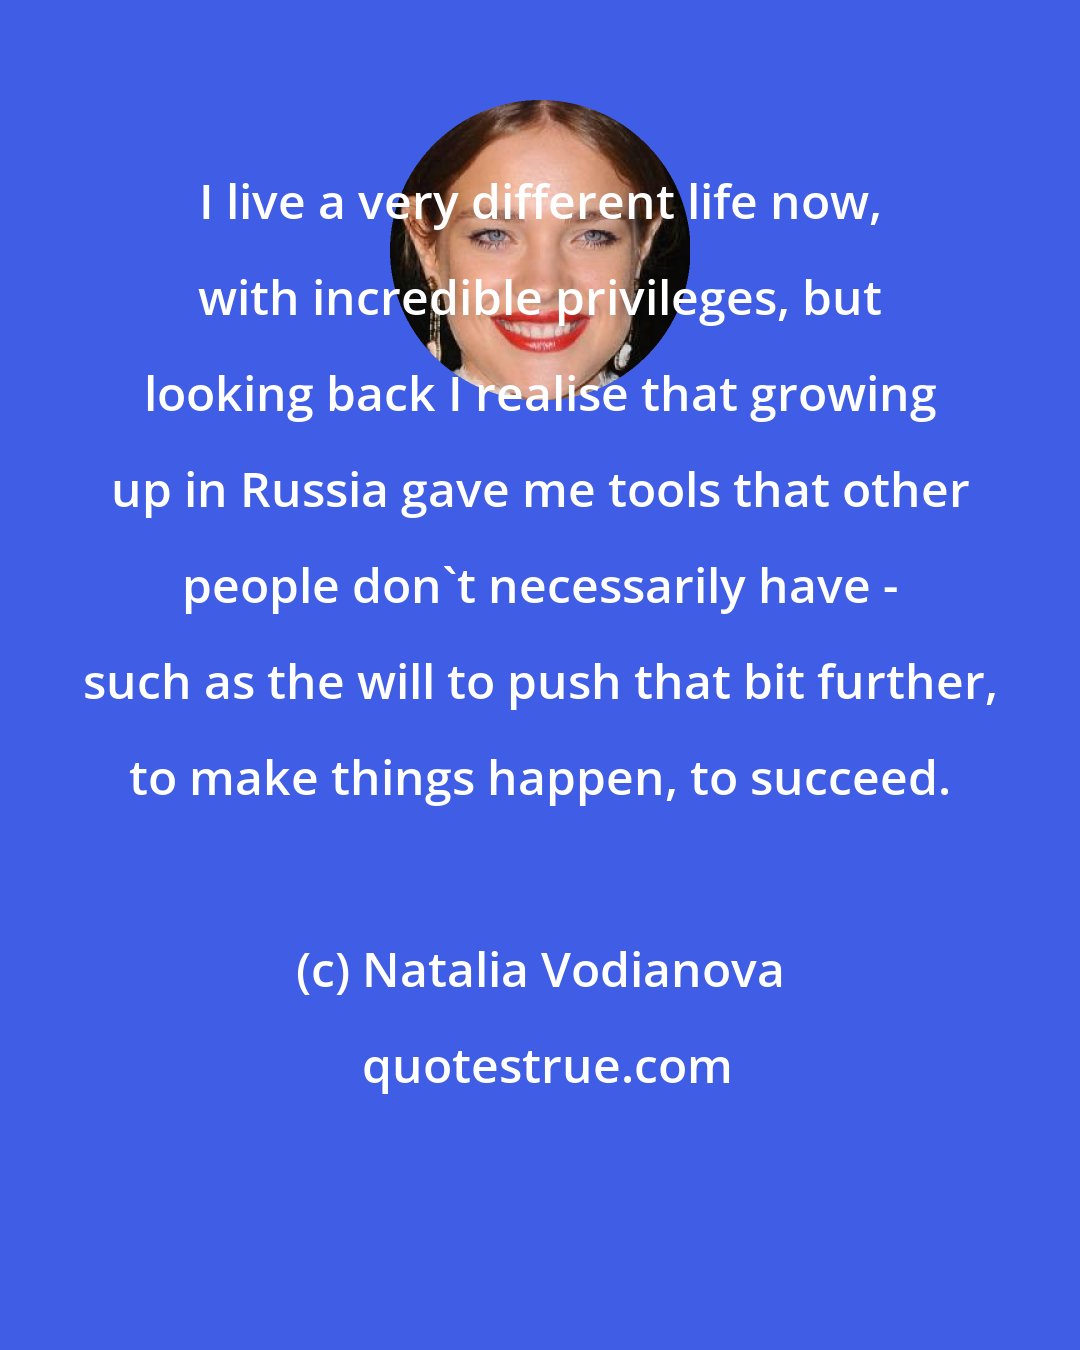 Natalia Vodianova: I live a very different life now, with incredible privileges, but looking back I realise that growing up in Russia gave me tools that other people don't necessarily have - such as the will to push that bit further, to make things happen, to succeed.